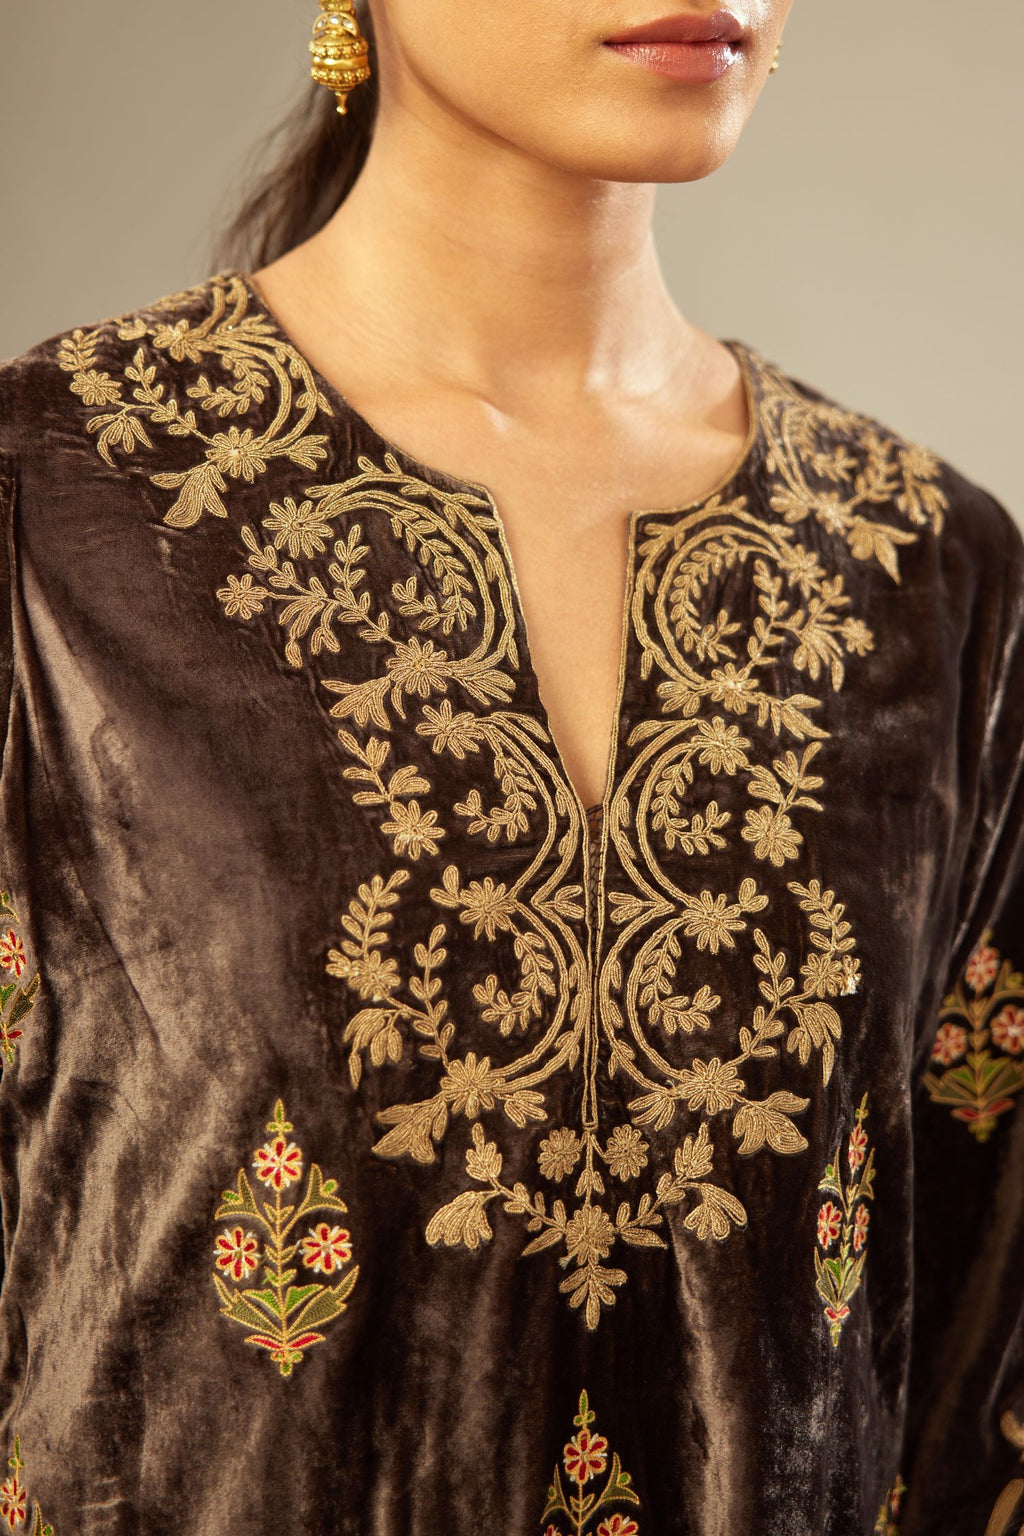 Grey silk velvet lined kurta set with light gold dori embroidery and contrast colored boota all-over the kurta.